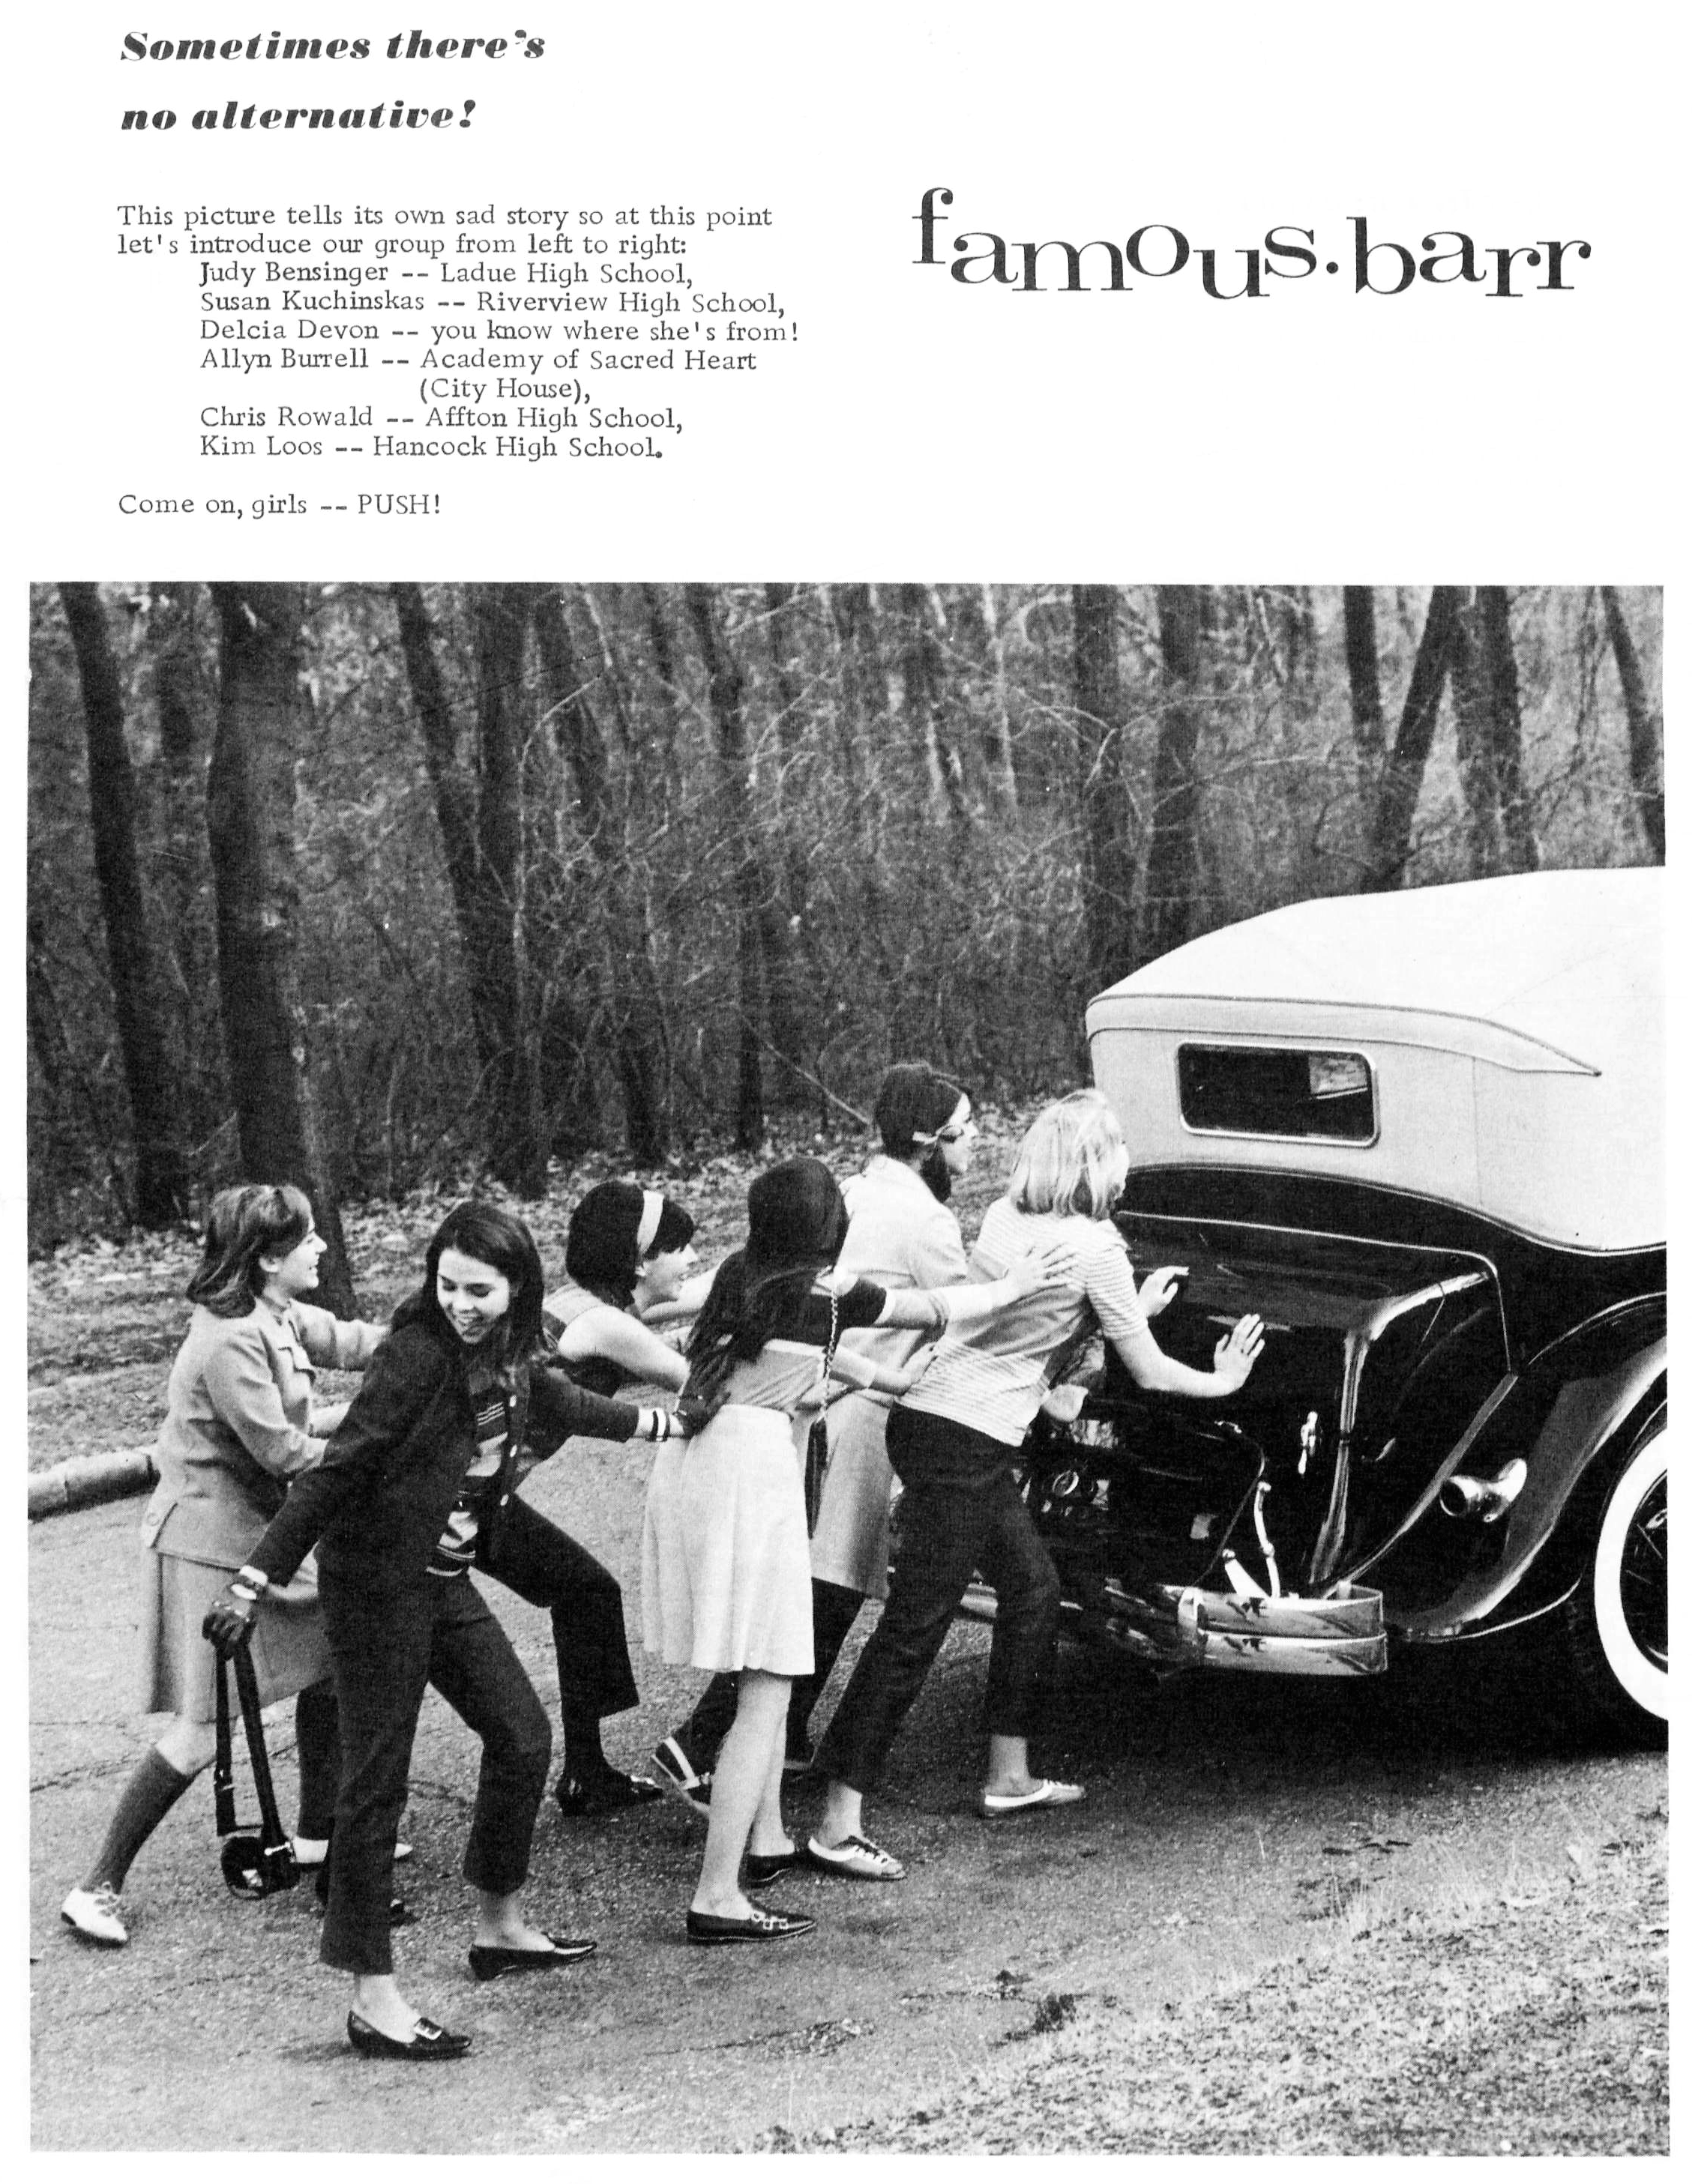 RGHS SENIOR Susan Kuchinskas (second from left) is featured in a Famous Barr ad in PROM MAGAZINE FEBRUARY 1967!